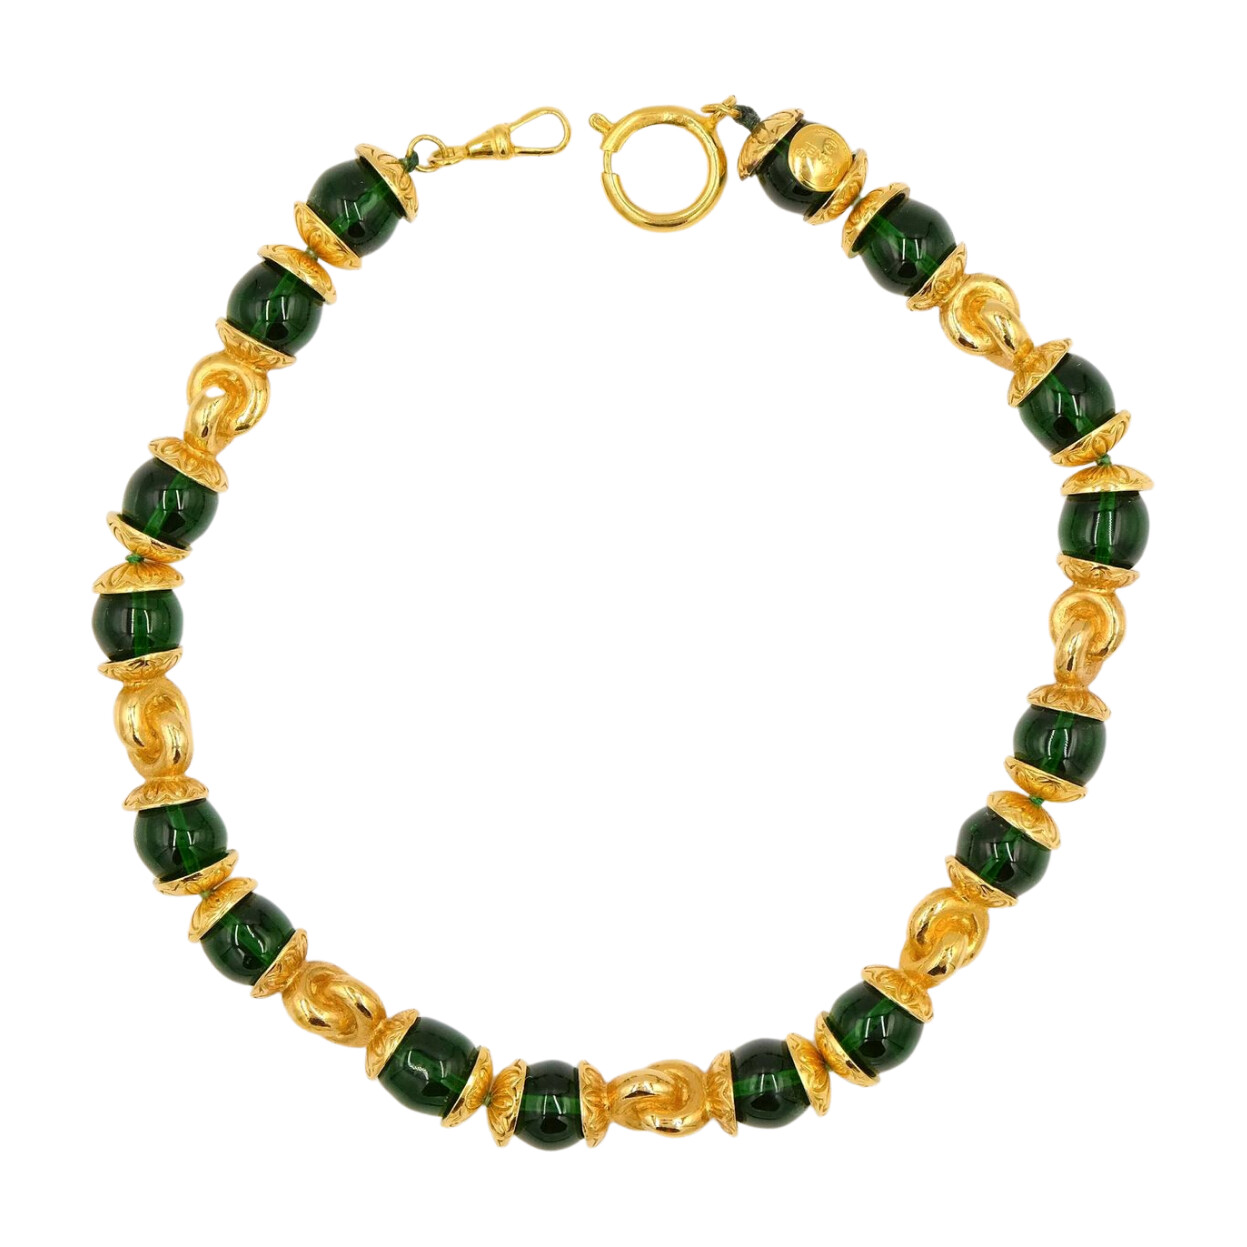 Vintage Chanel Gripoix Green Necklace